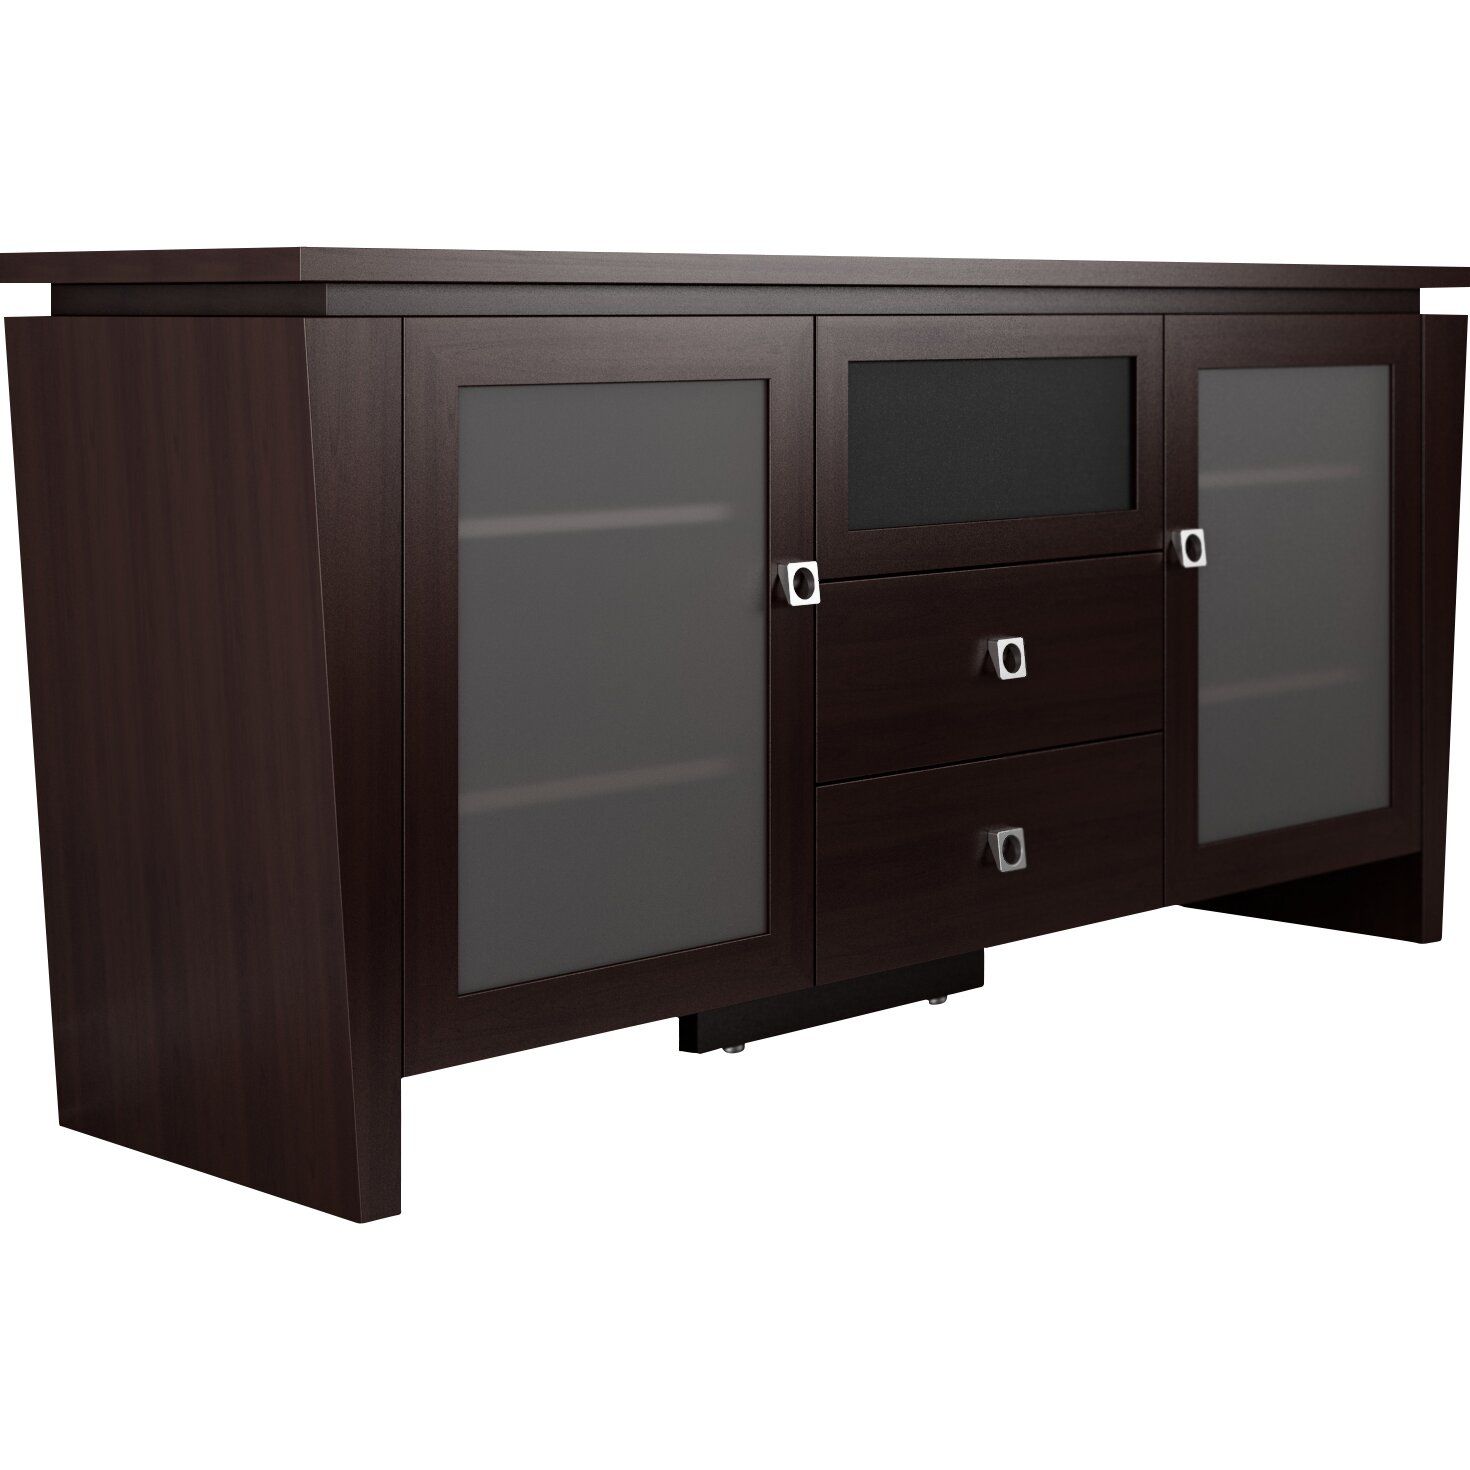 Furnitech Classic Modern Tv Stand & Reviews | Wayfair With Regard To Classic Tv Cabinets (Photo 13 of 15)